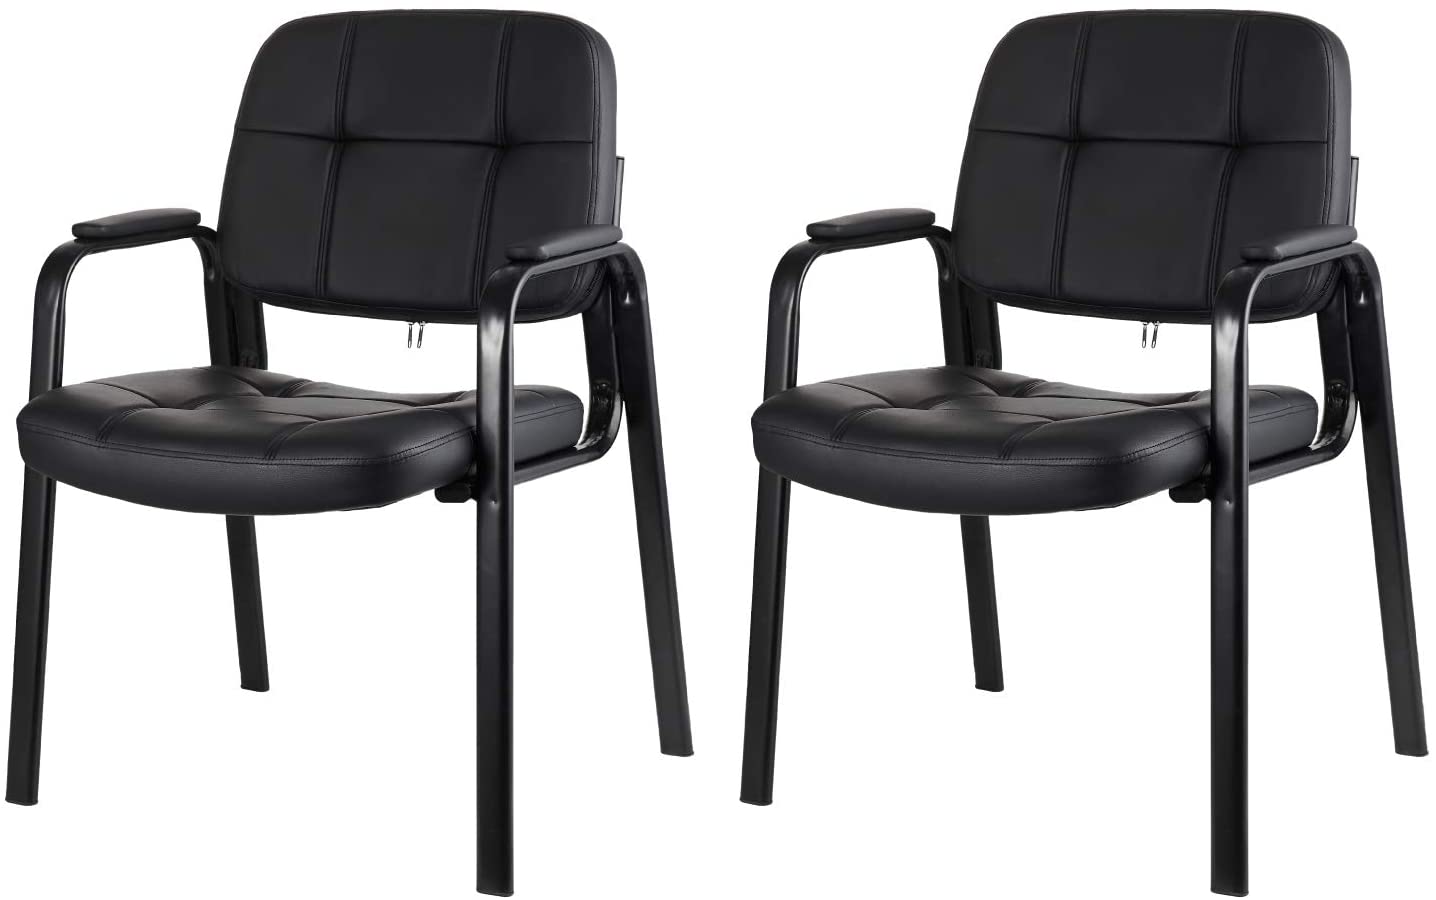 CLATINA Waiting Room Guest Chair with Bonded Leather Padded Arm Rest for Office Reception Black 2Pack - image 1 of 6